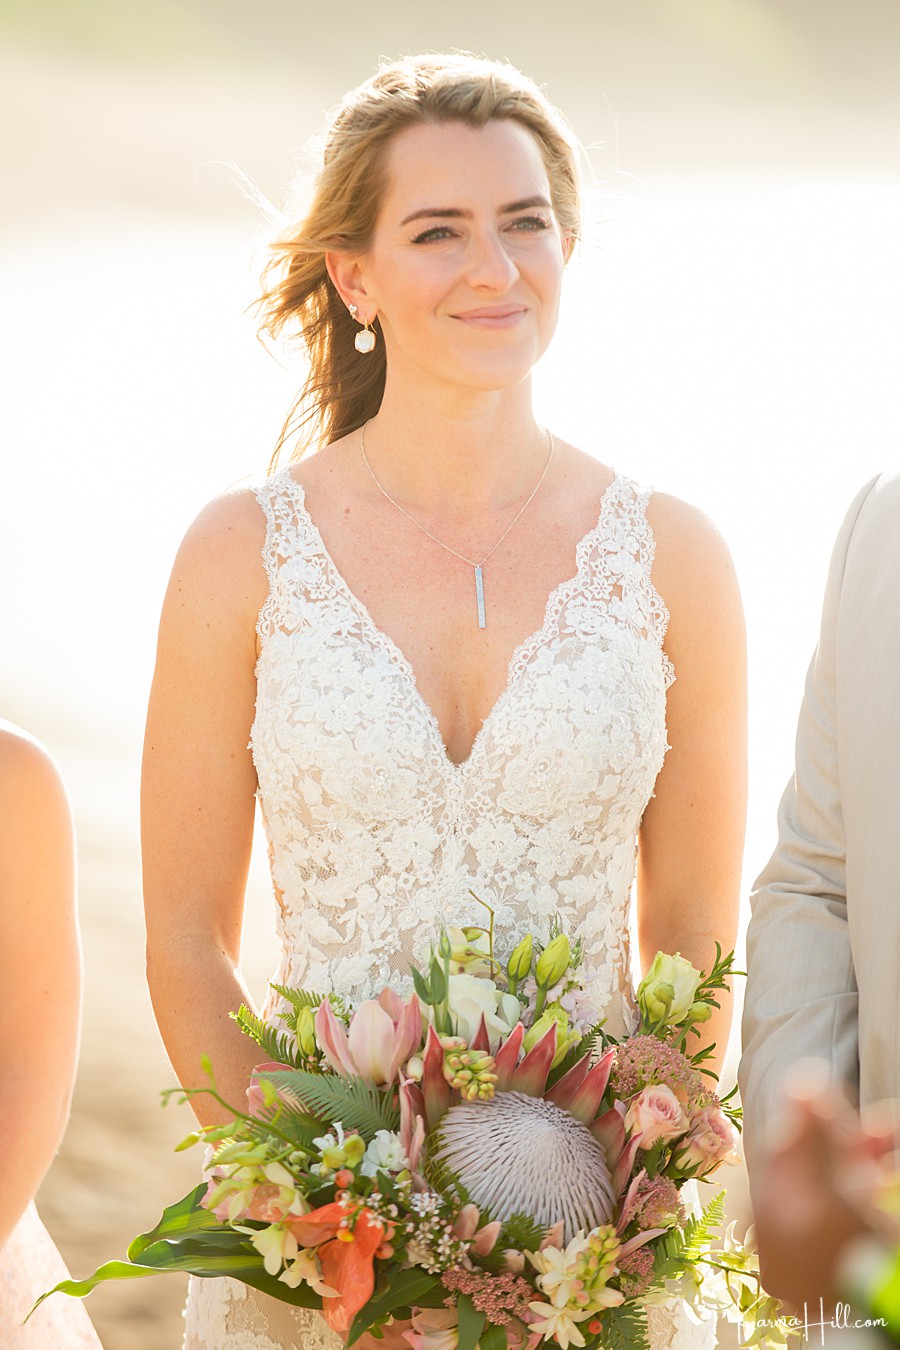 beautiful bride at a real wedding in hawaii on the beach 